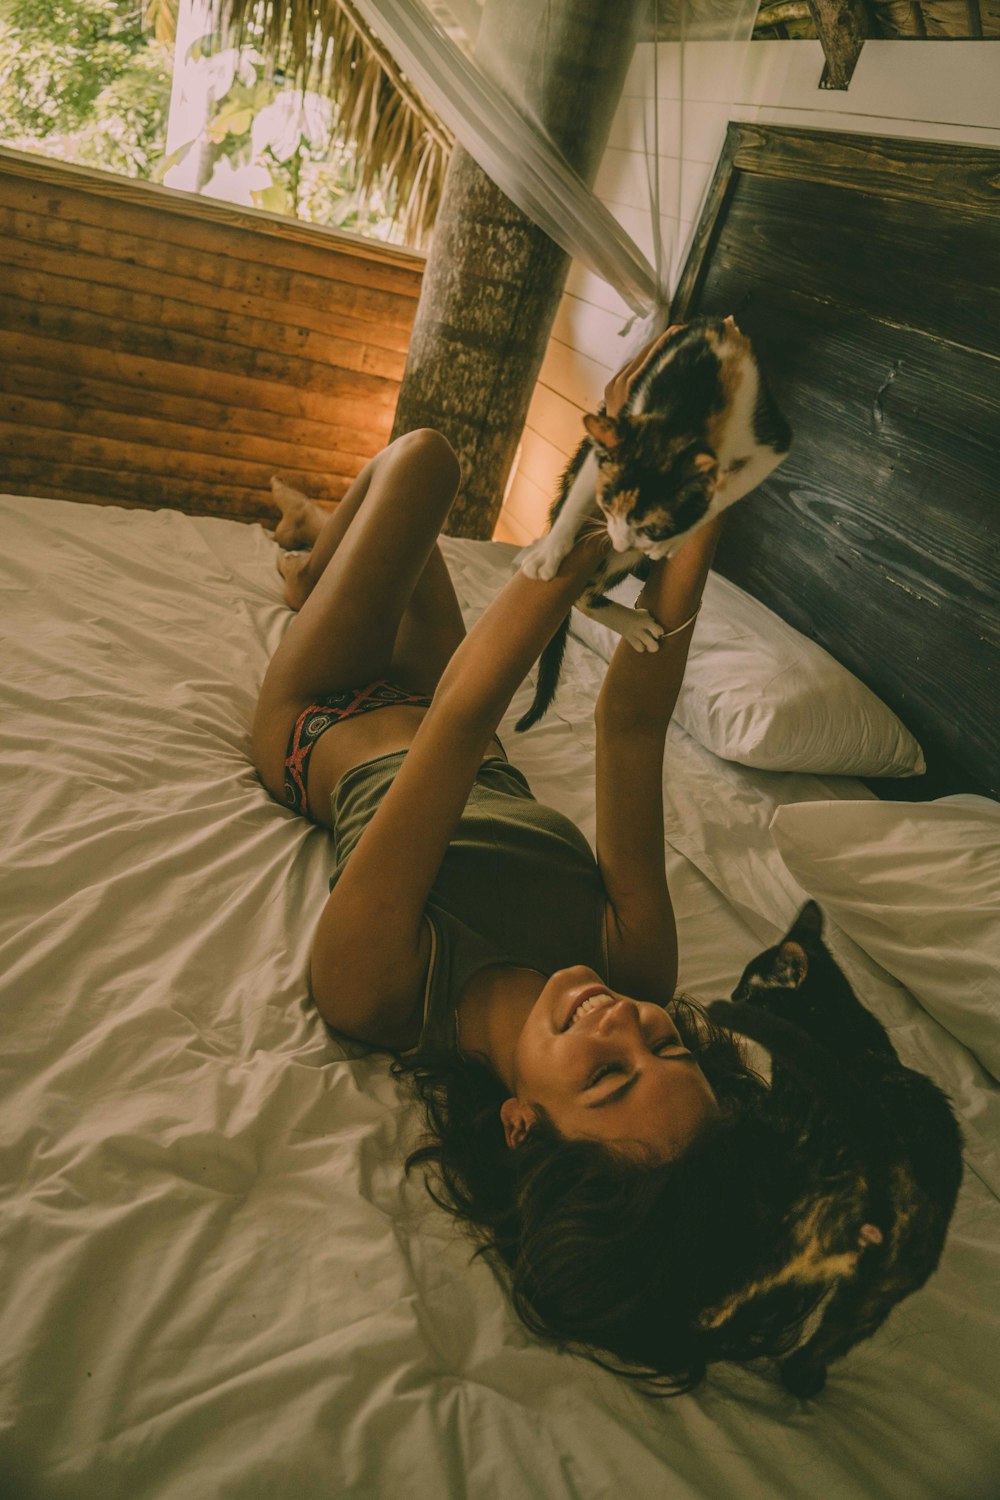 woman lying on bed while holding a cat